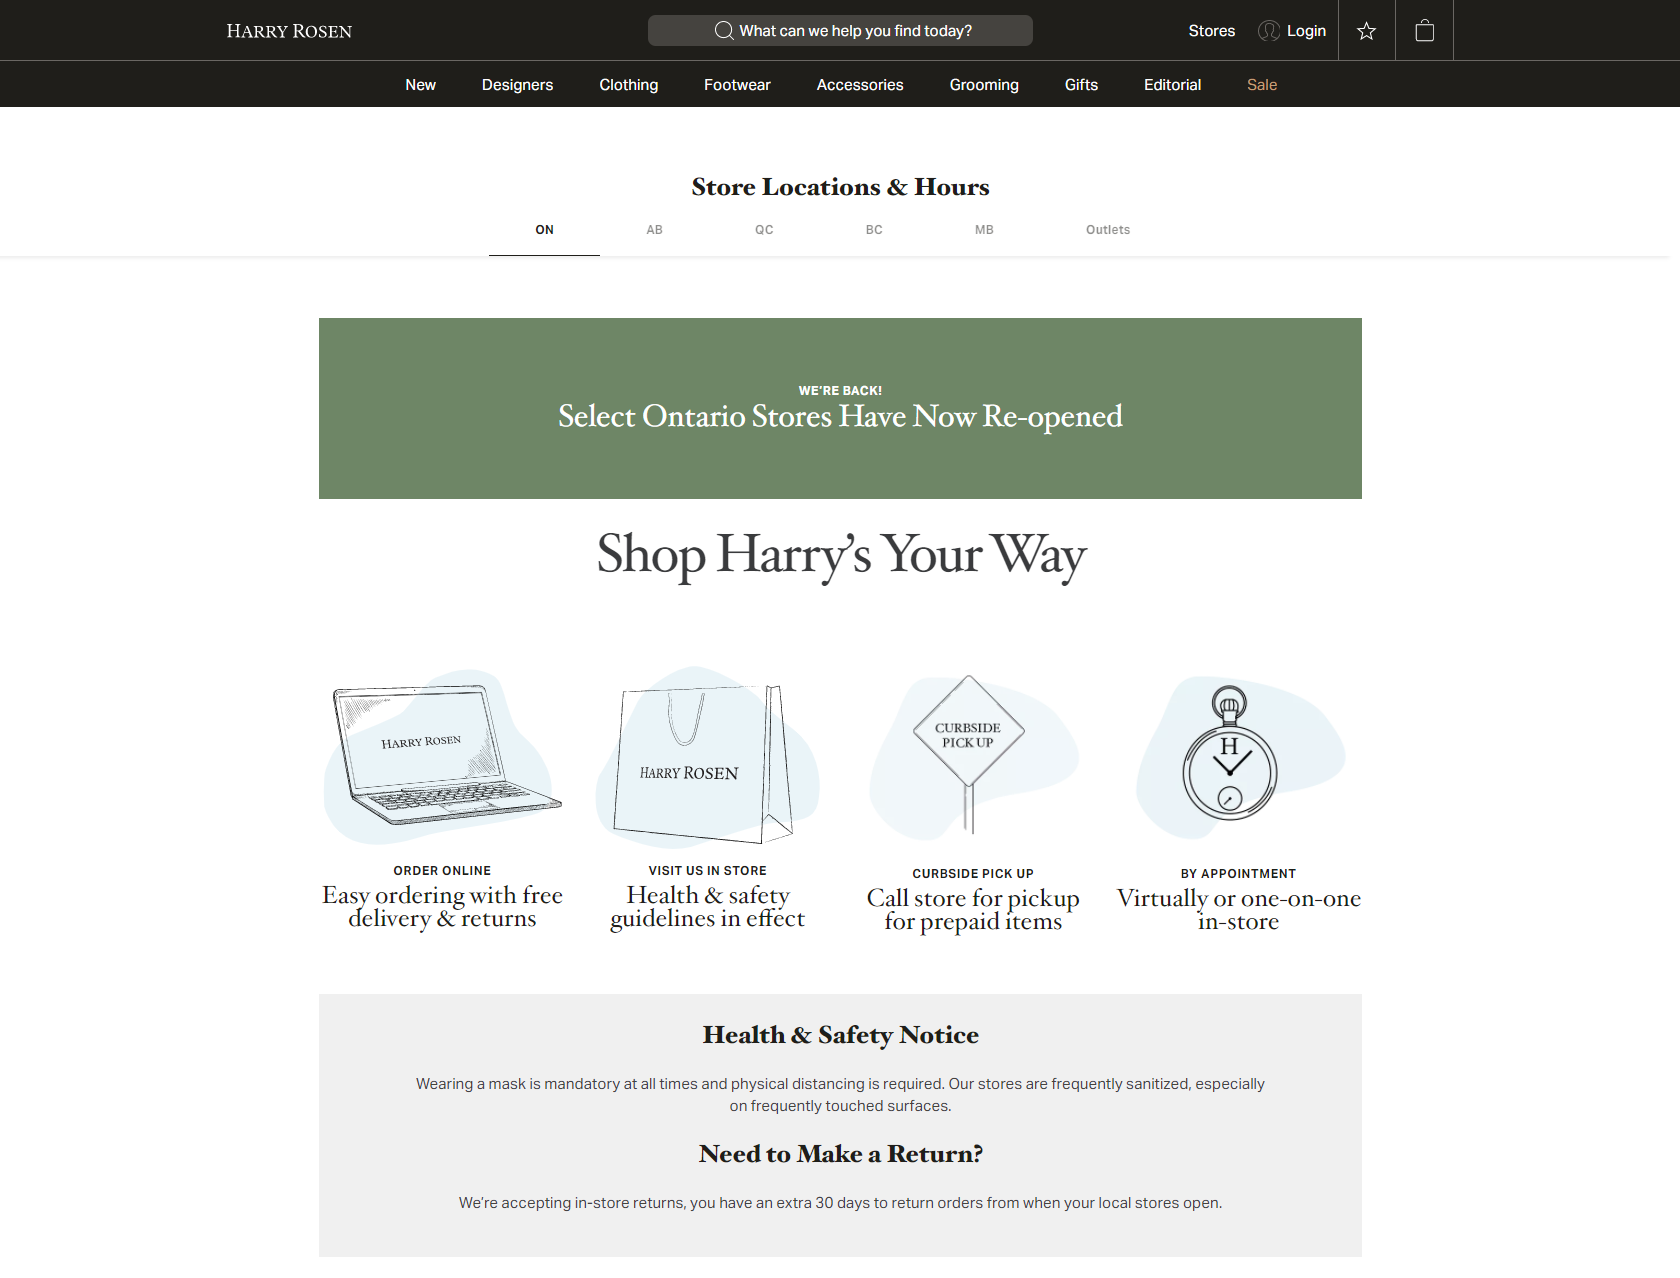 A screenshot of Harry Rosen's store locator page on their website: showing Harry by appointment as an option to schedule an appointment